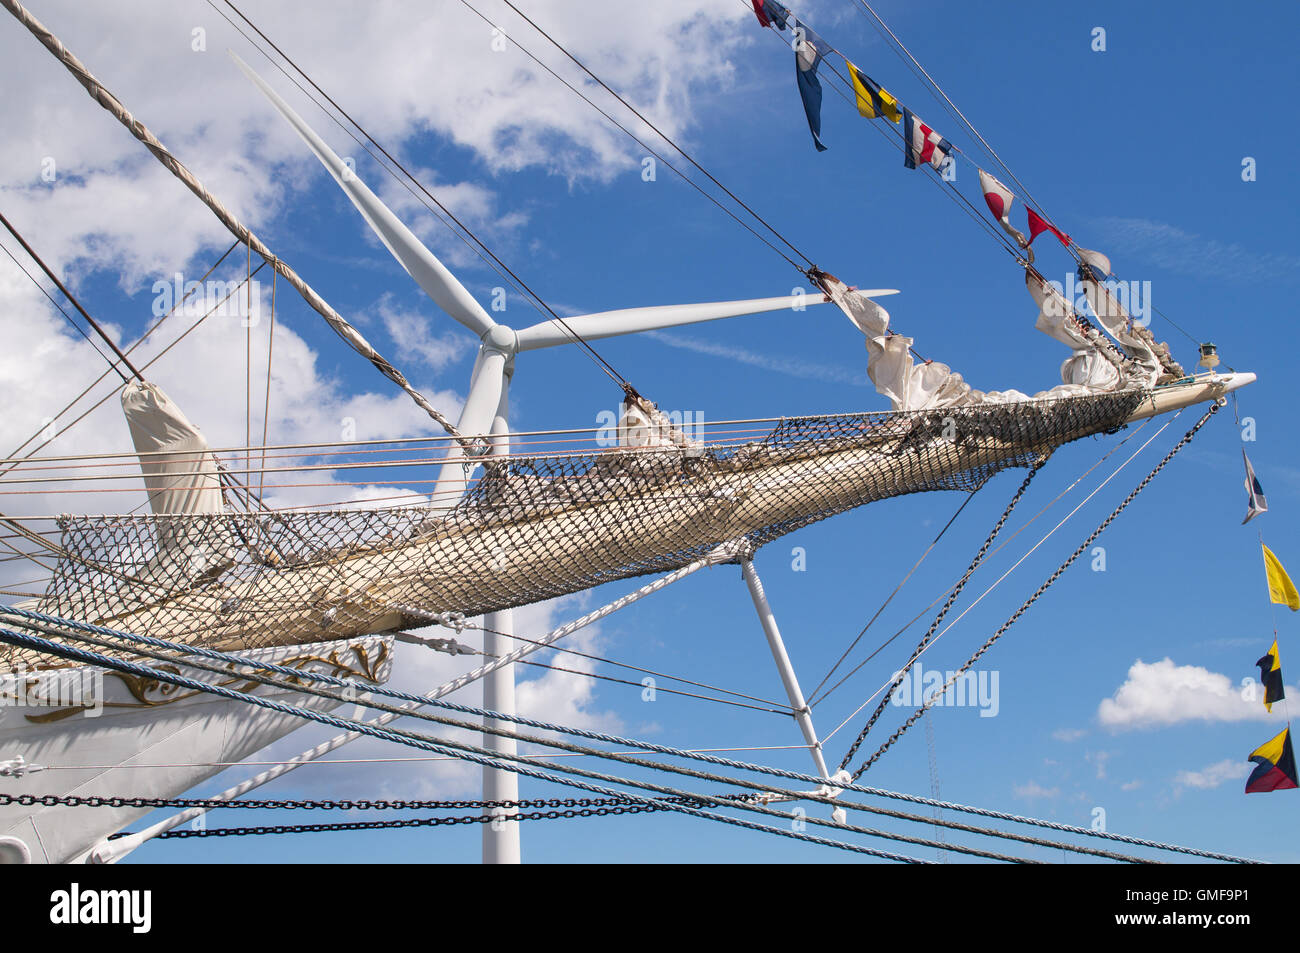 Blyth, UK. 26th Aug, 2016. Crowds visit the Port of Blyth in Northumberland to see the Tall Ships moored. The bowsprit of the Polish training ship Dar Młodzieży with a modern example of wind power behind  Credit:  Washington Imaging/Alamy Live News Stock Photo